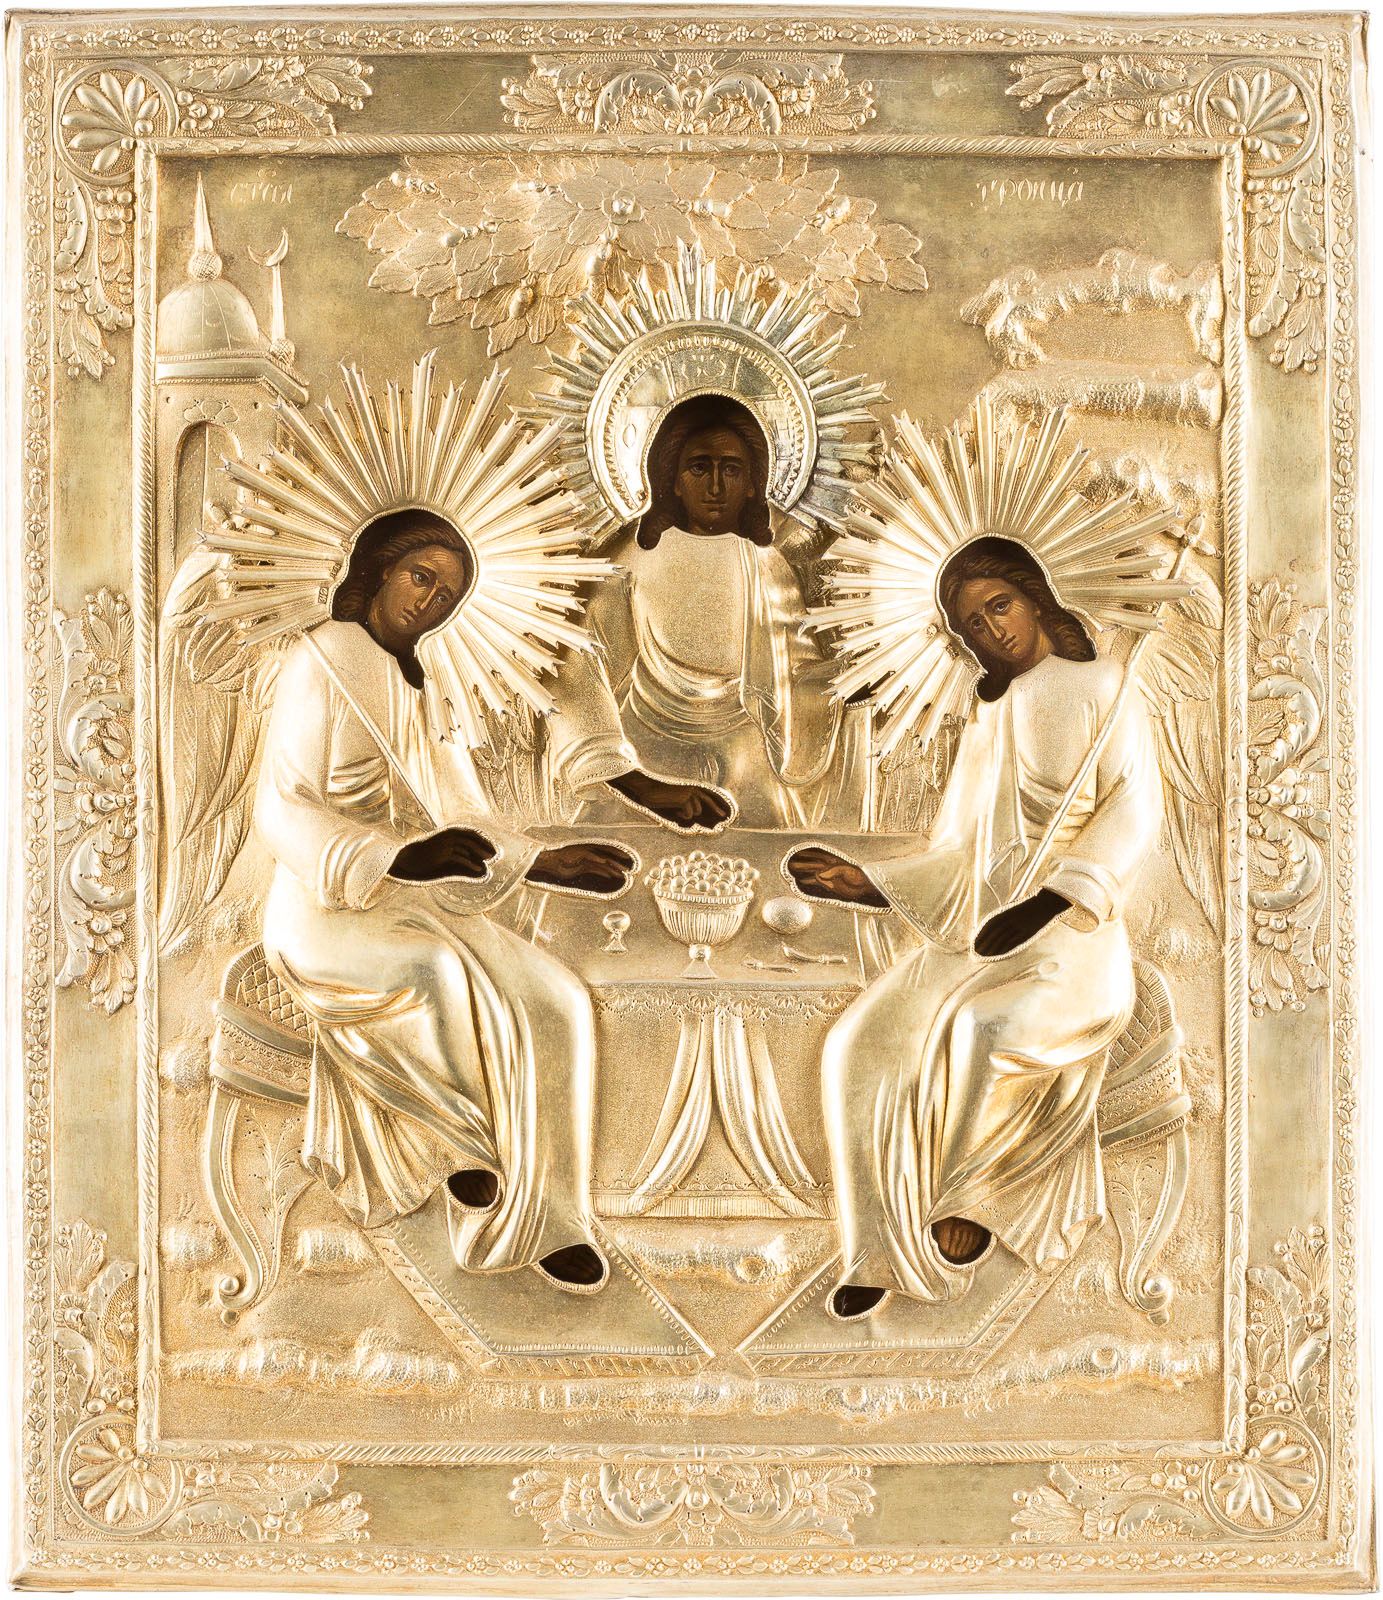 AN ICON SHOWING THE OLD TESTAMENT TRINITY WITH A SILVER-GIL 俄罗斯，莫斯科，1836年（Oklad）&hellip;